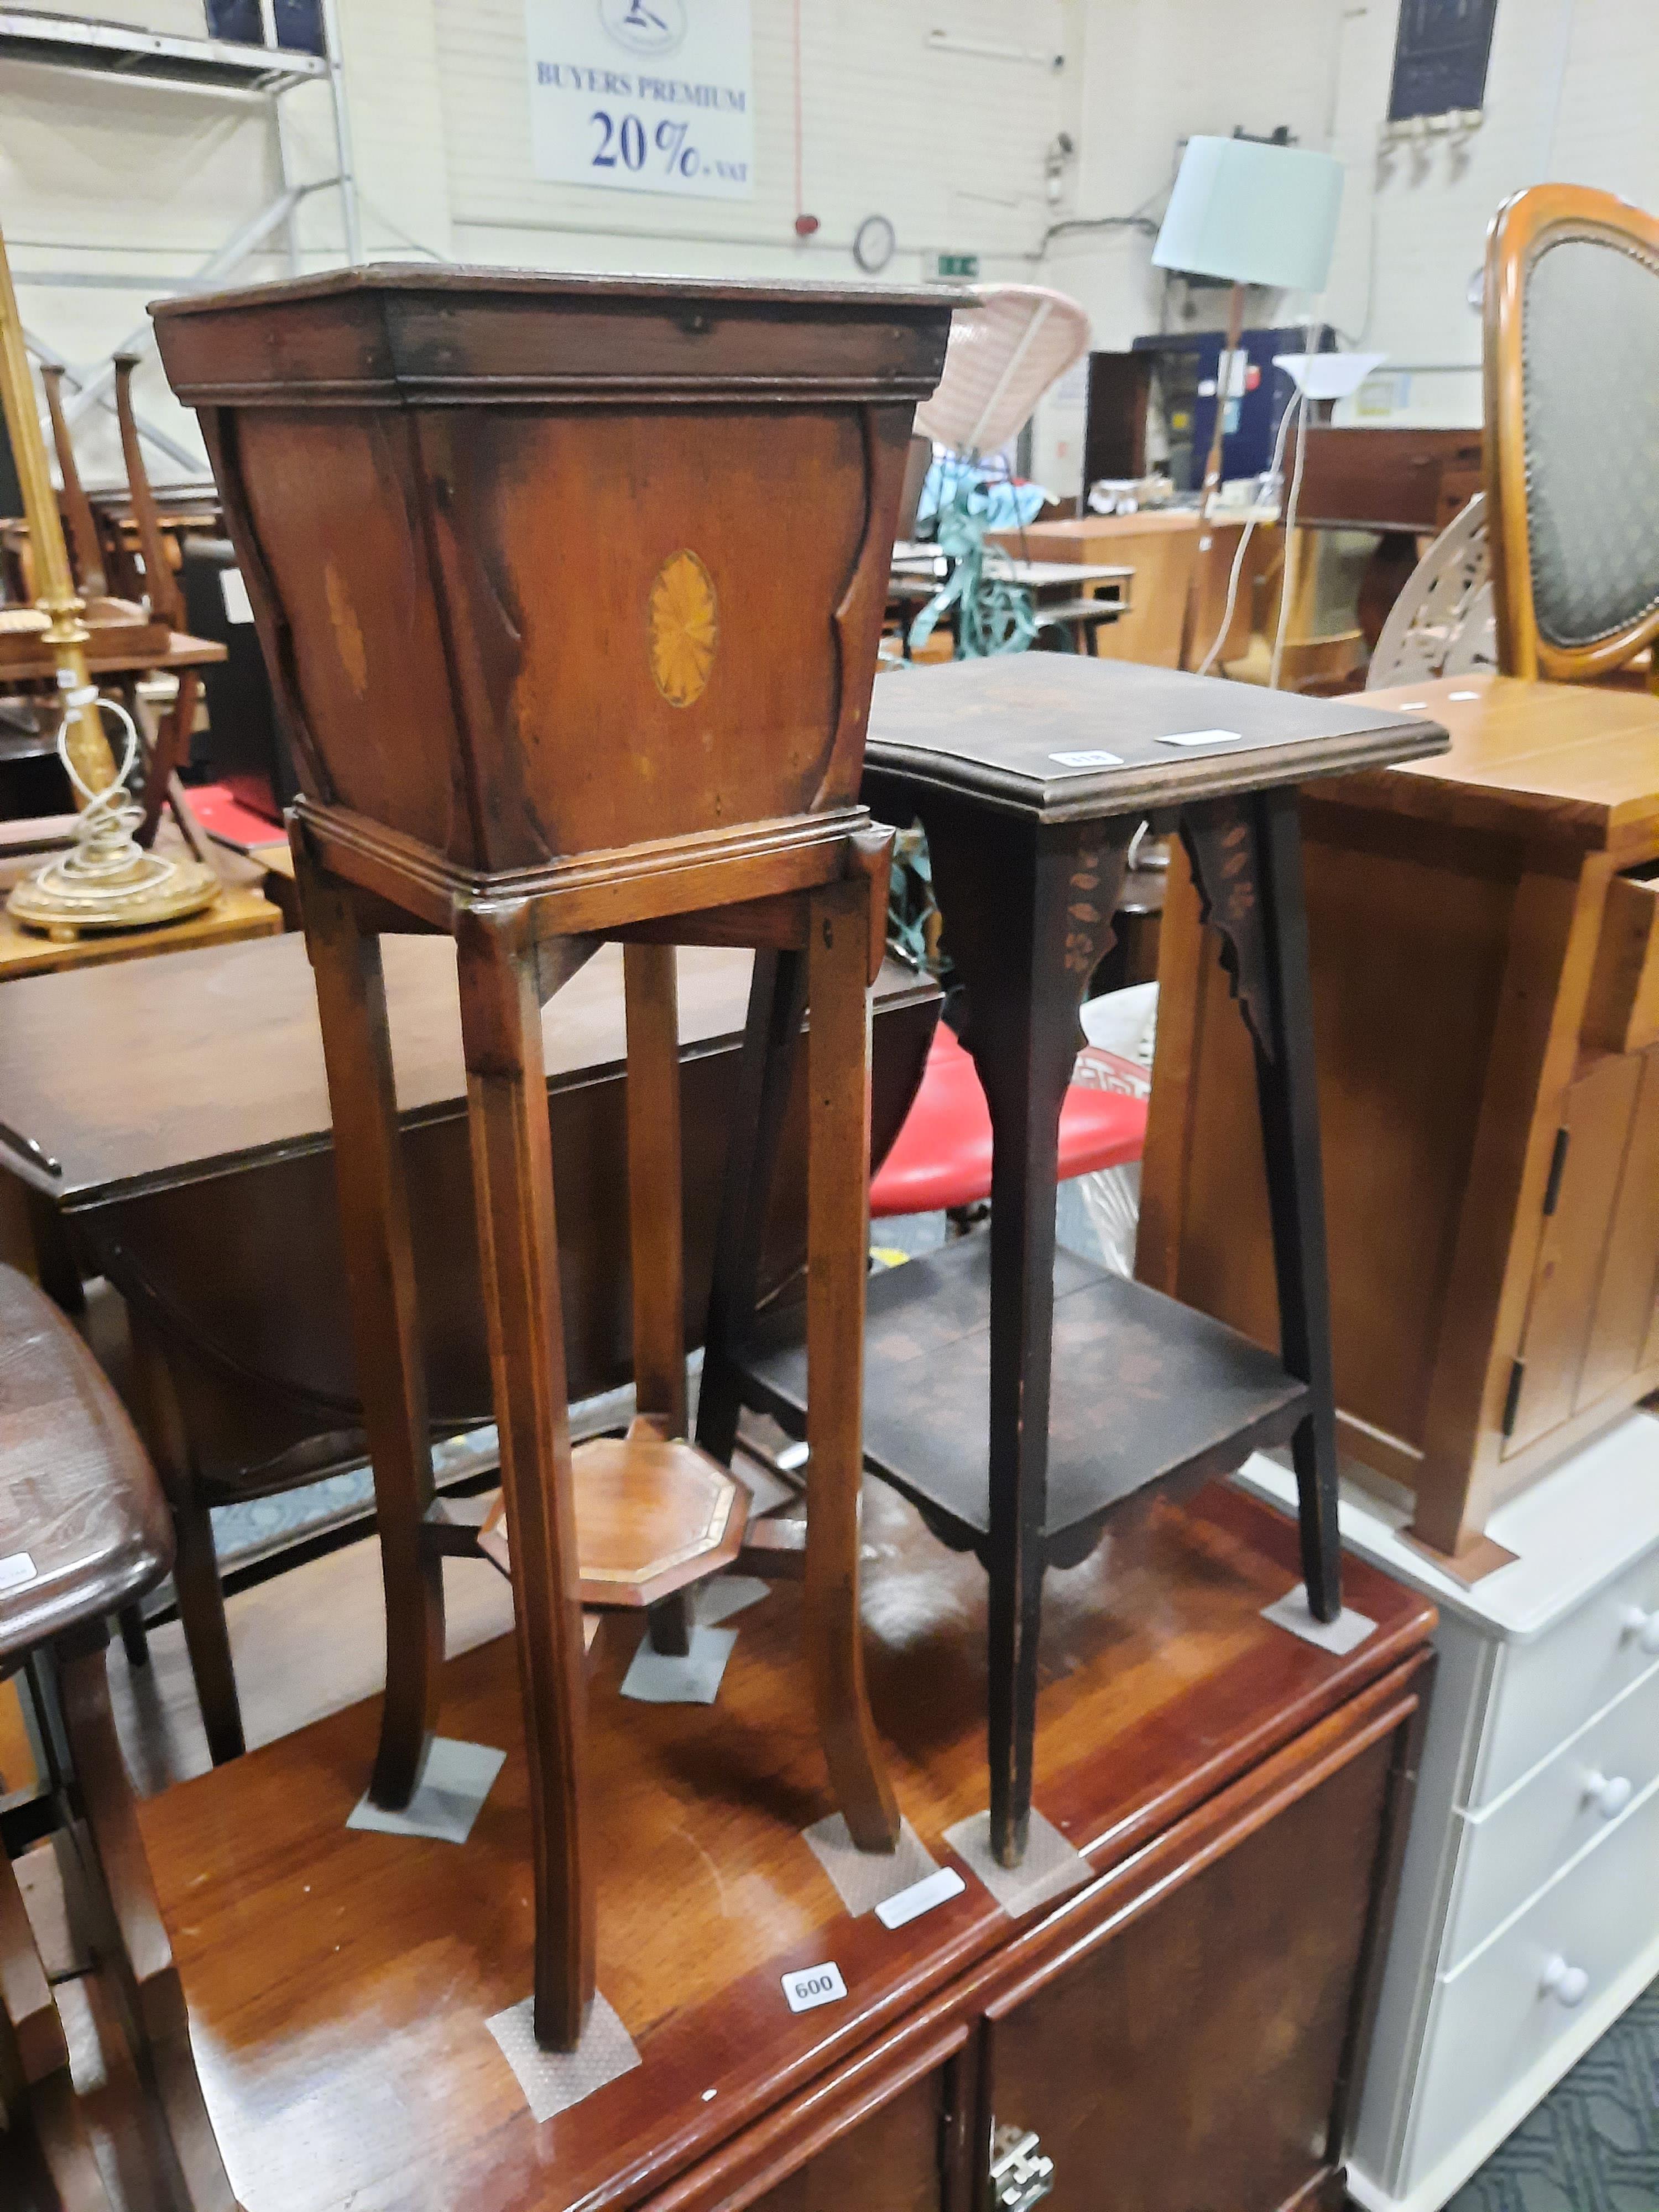 2 OCCASIONAL TABLES